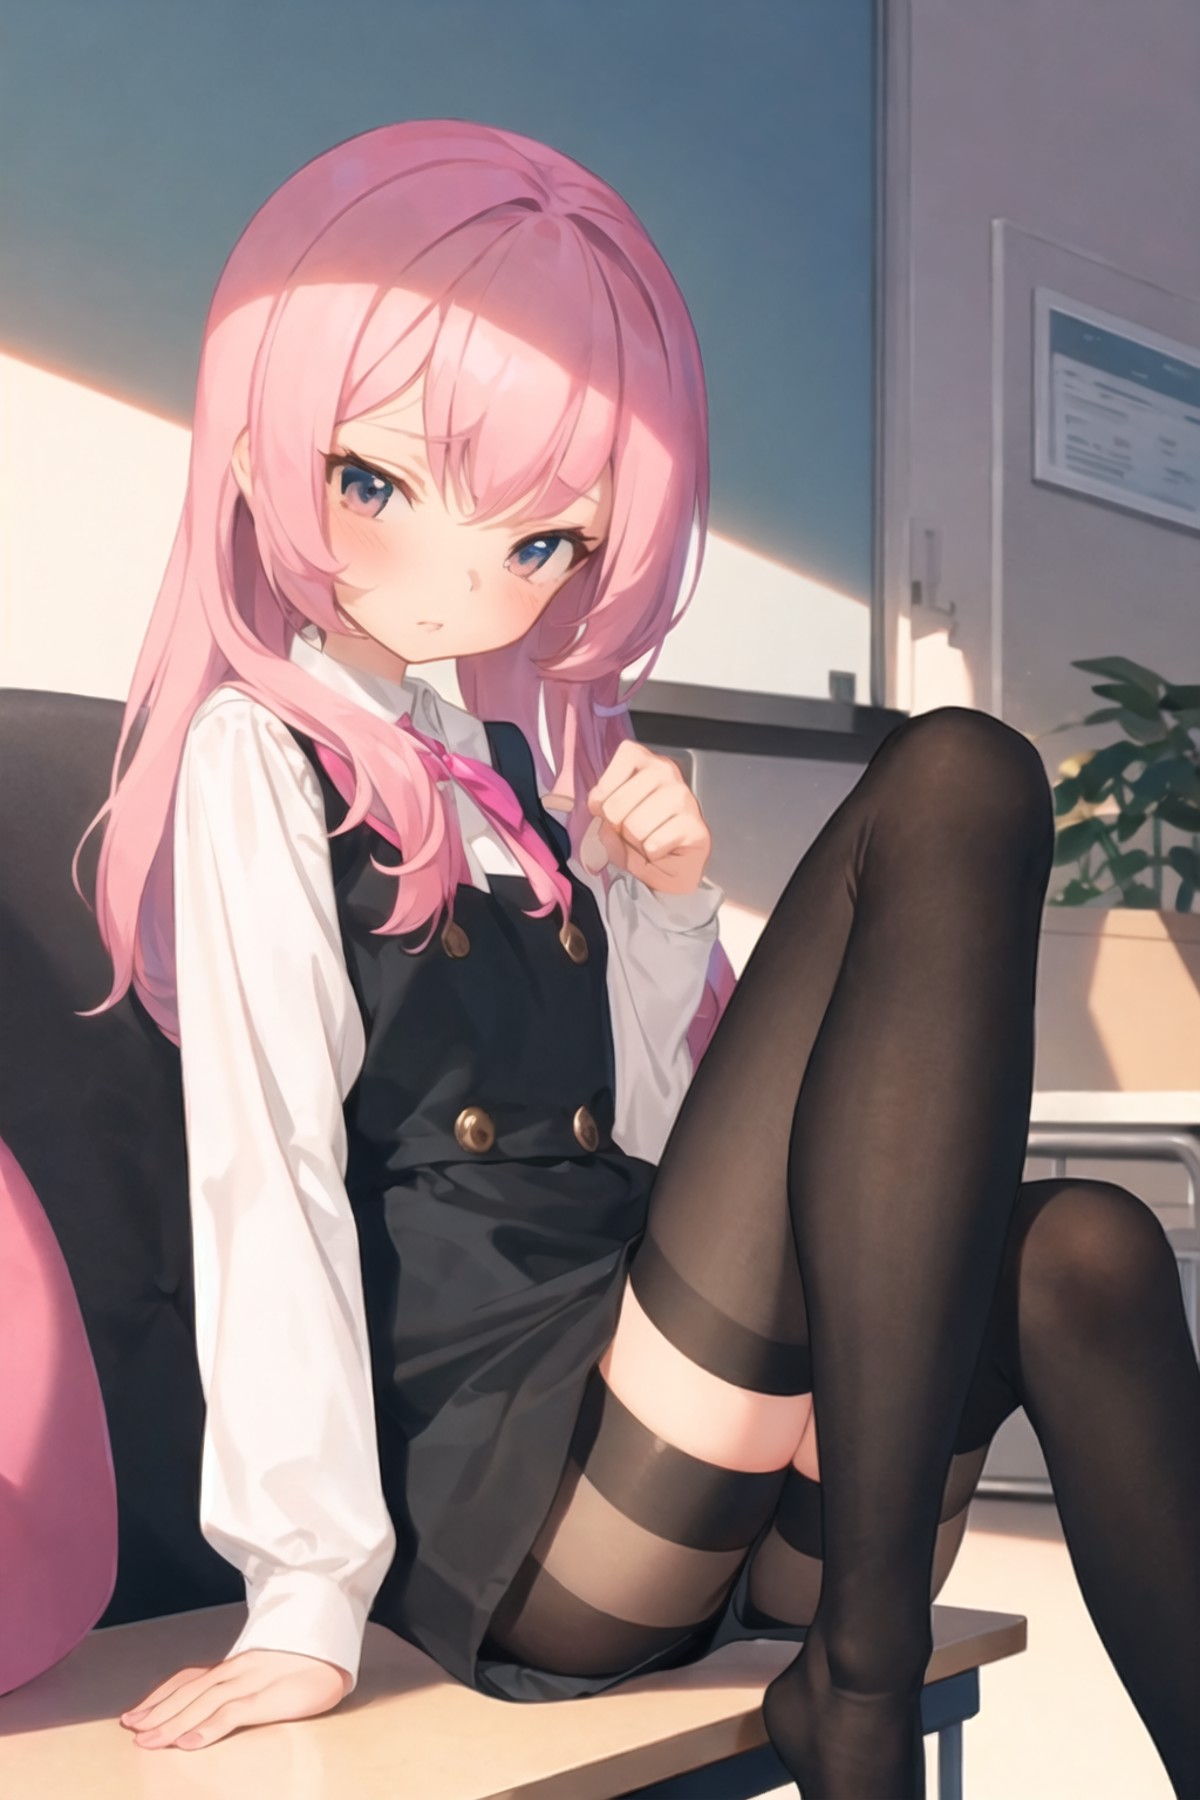 a pink hair girl in black stocking sitting on my desk, living room